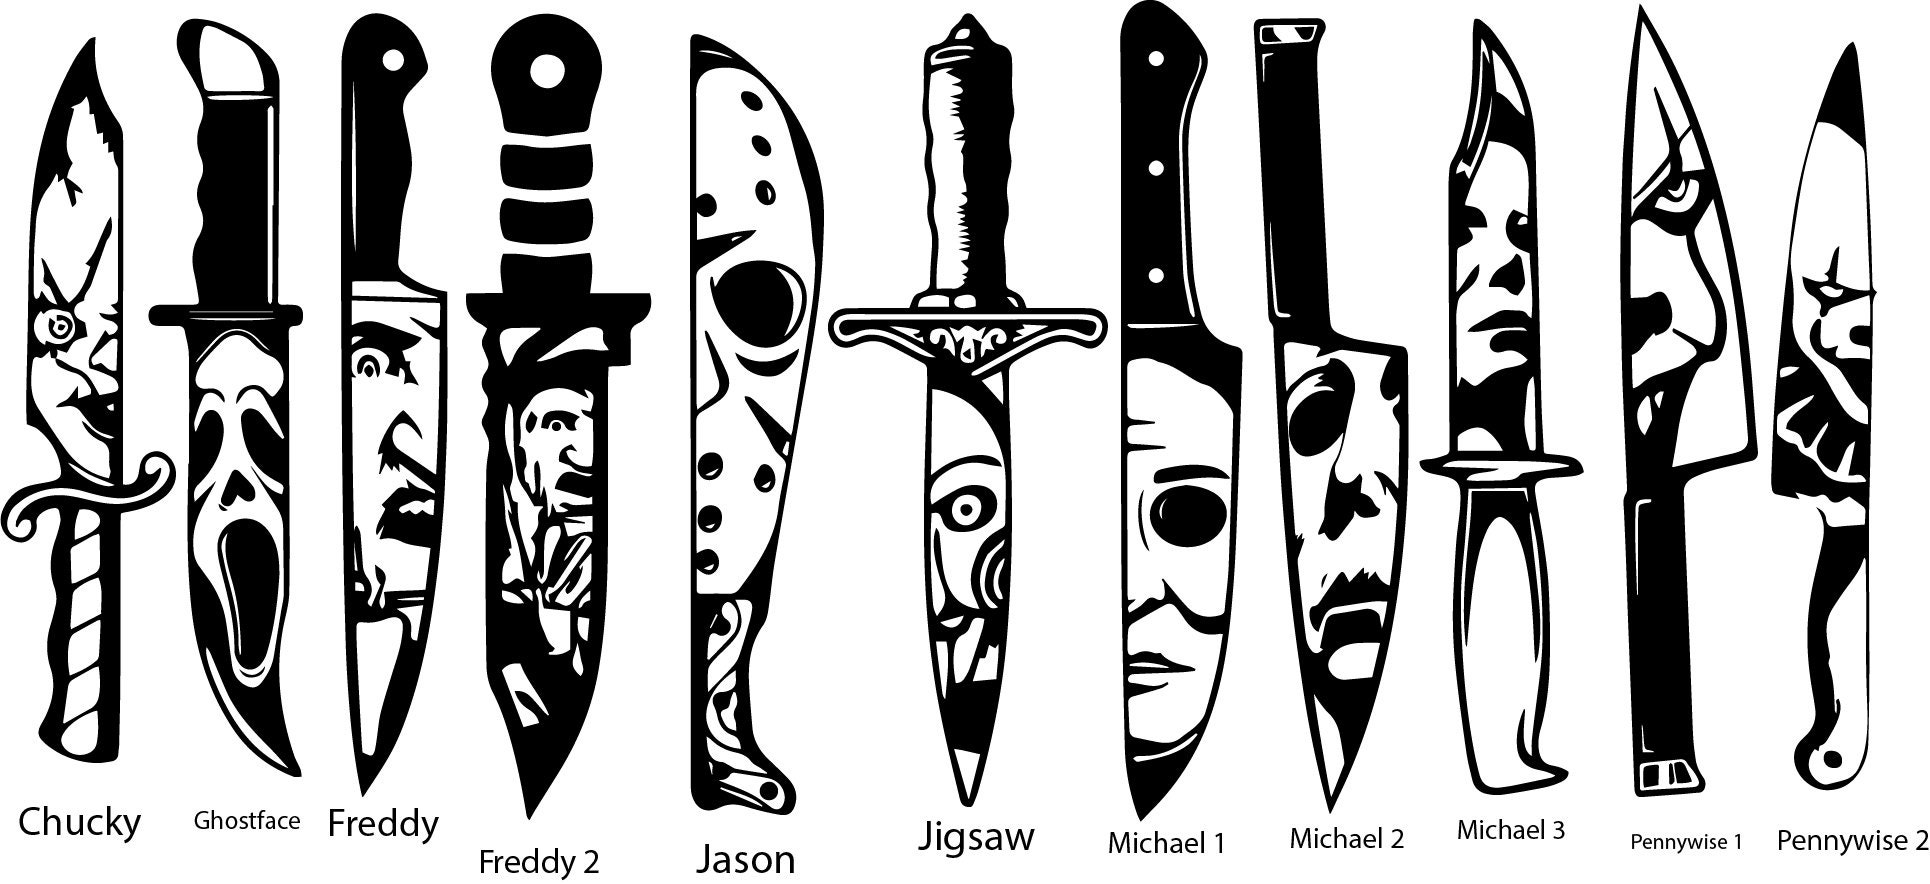 Horror Movie Characters In Knives svg eps dxf png file – lasoniansvg